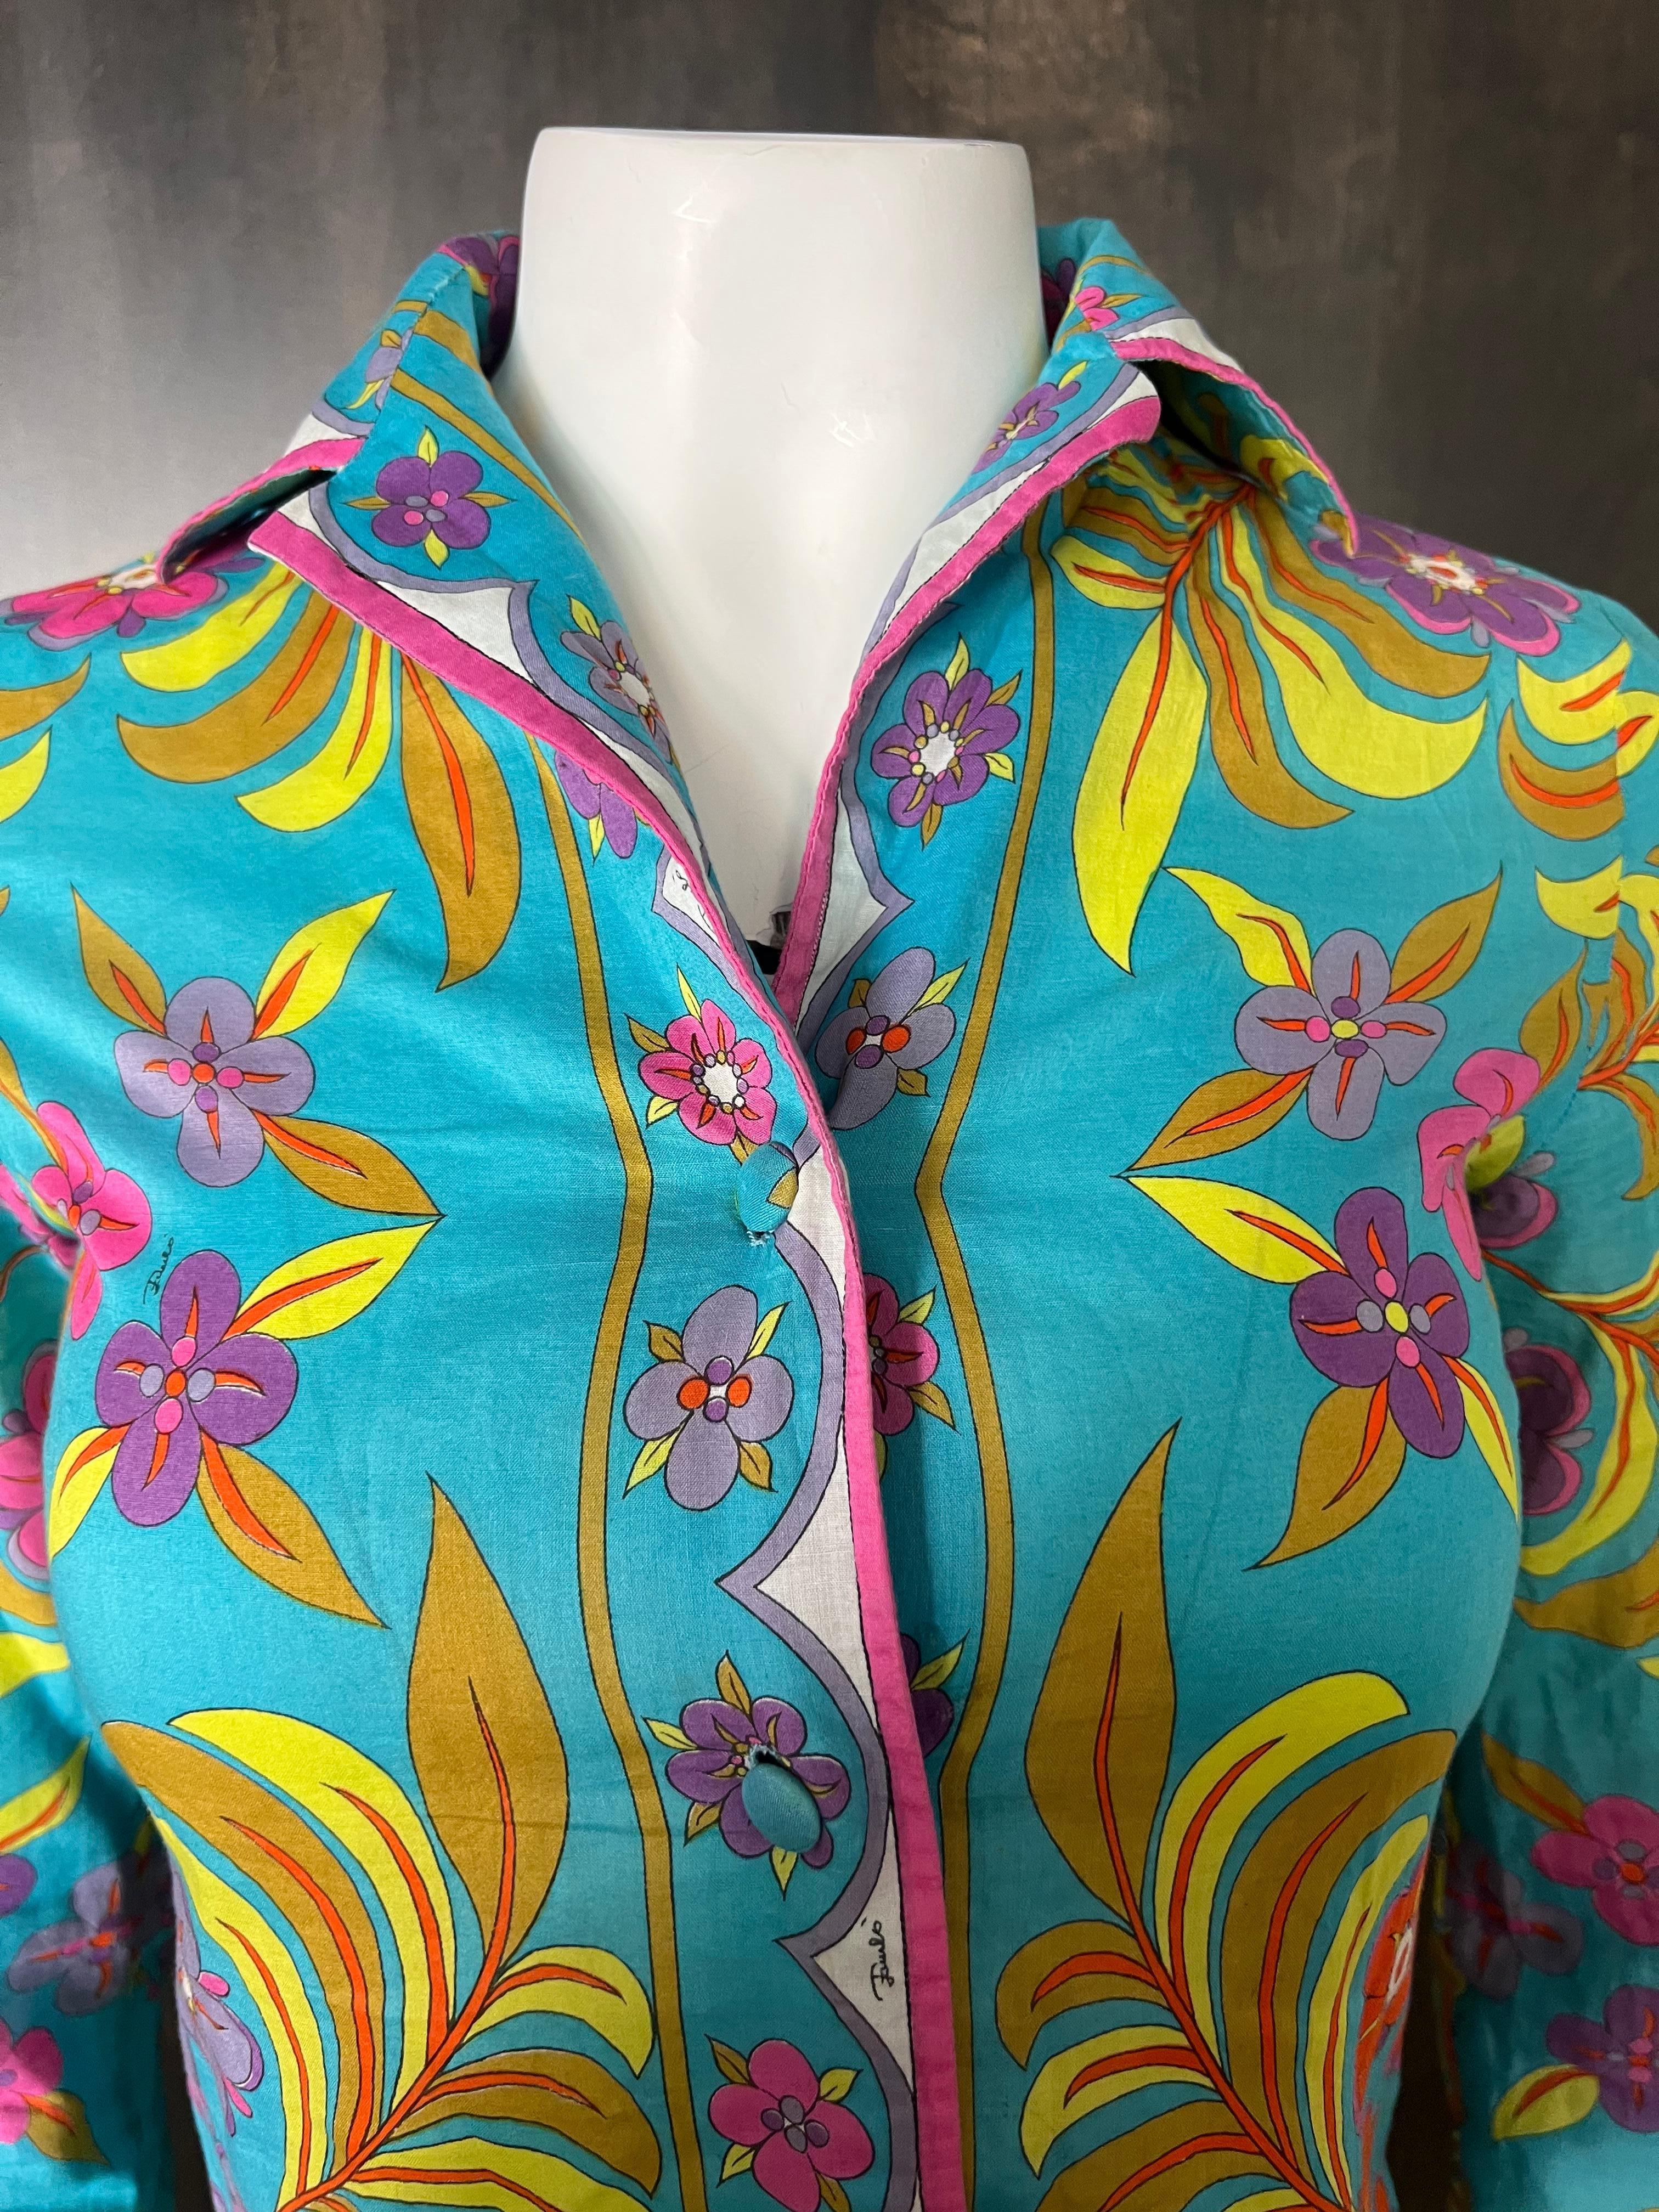 - Featuring blue, pink, purple, yellow, orange colors
- 100% cotton
- Floral motif pattern
- Long sleeves
- Collar
- Front button closure
- Fits XS/S
